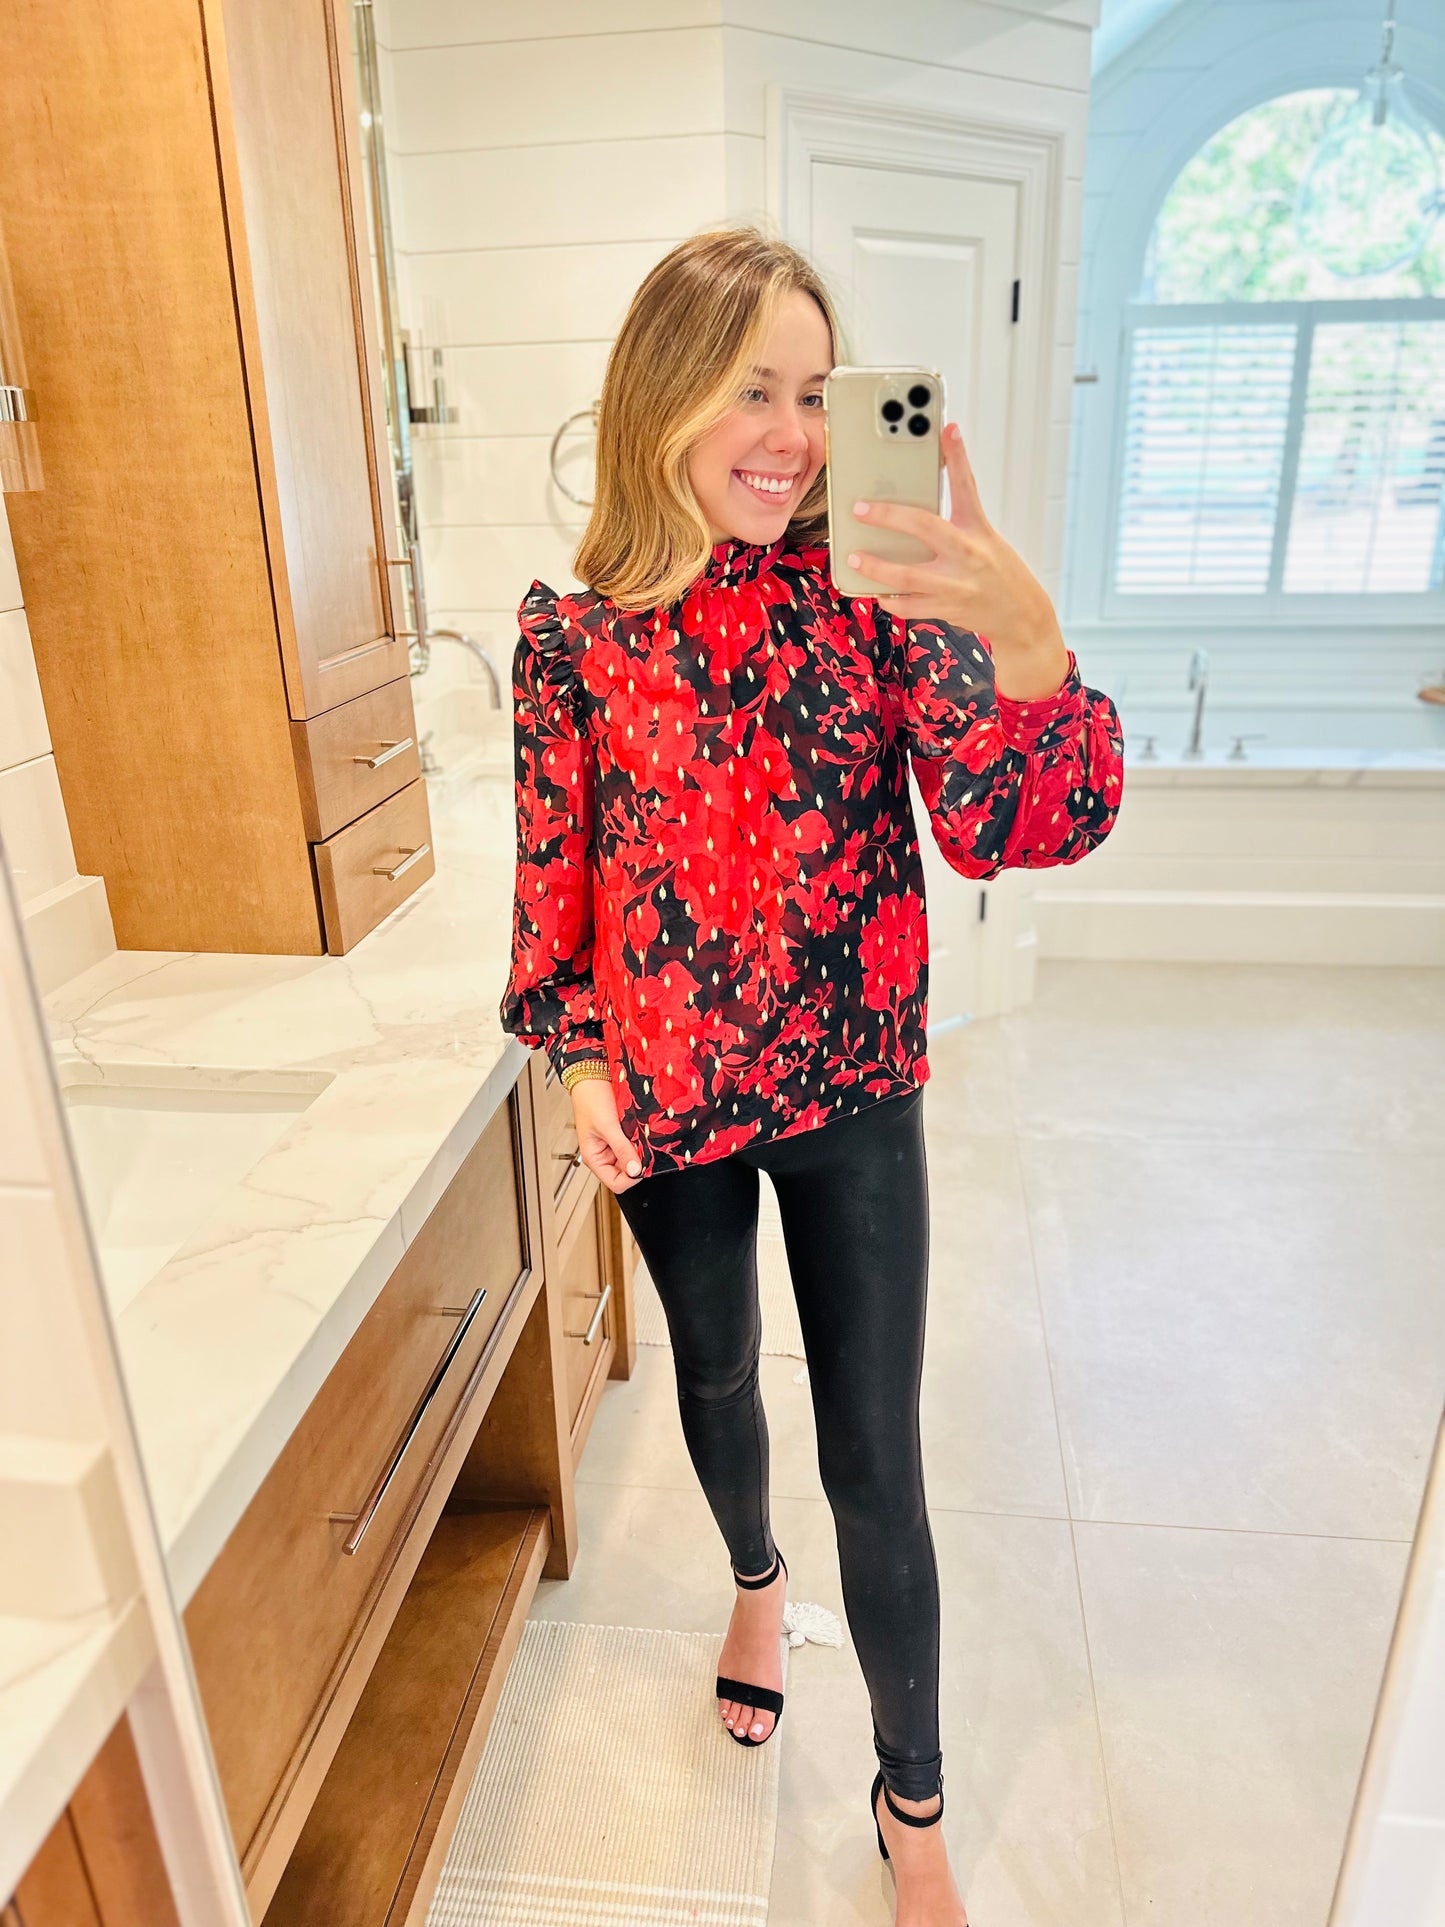 The Fifi Floral Blouse